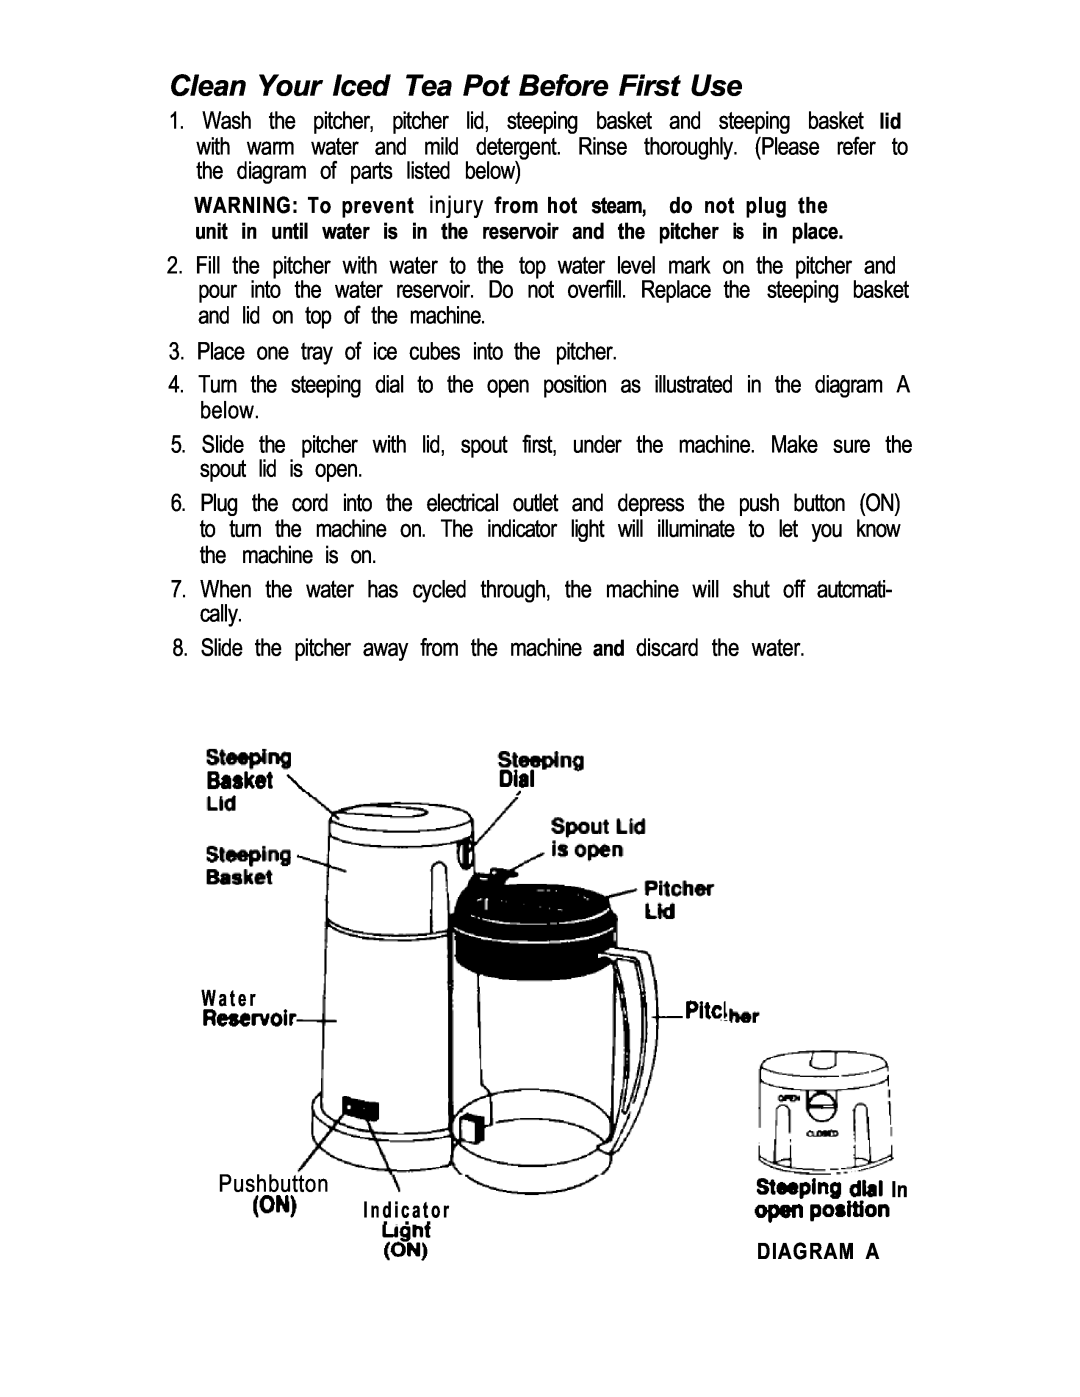 Mr. Coffee TM3 manual Clean Your Iced Tea Pot Before First Use, Pushbutton 